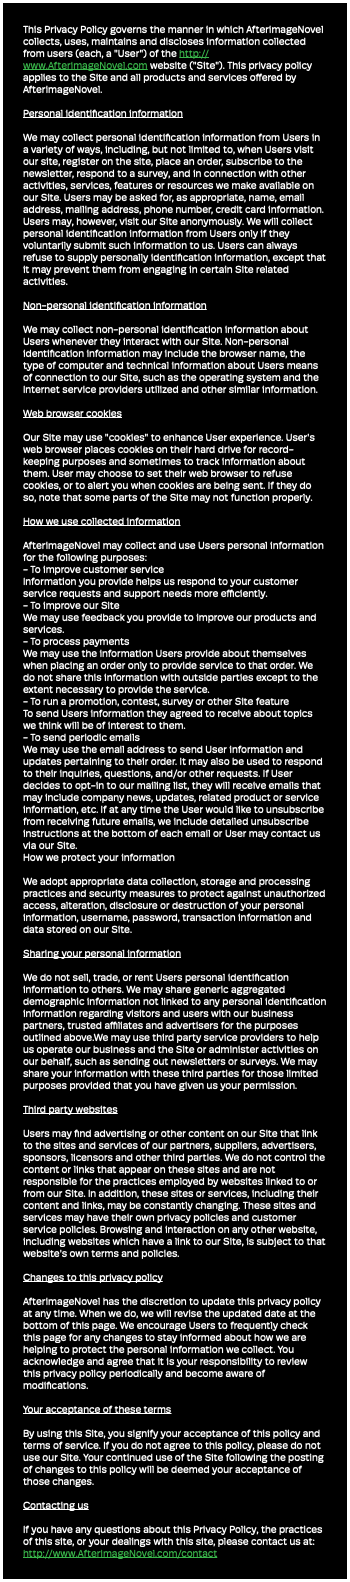 This Privacy Policy governs the manner in which AfterimageNovel collects, uses, maintains and discloses information collected from users (each, a "User") of the http://www.AfterimageNovel.com website ("Site"). This privacy policy applies to the Site and all products and services offered by AfterimageNovel. Personal identification information We may collect personal identification information from Users in a variety of ways, including, but not limited to, when Users visit our site, register on the site, place an order, subscribe to the newsletter, respond to a survey, and in connection with other activities, services, features or resources we make available on our Site. Users may be asked for, as appropriate, name, email address, mailing address, phone number, credit card information. Users may, however, visit our Site anonymously. We will collect personal identification information from Users only if they voluntarily submit such information to us. Users can always refuse to supply personally identification information, except that it may prevent them from engaging in certain Site related activities. Non-personal identification information We may collect non-personal identification information about Users whenever they interact with our Site. Non-personal identification information may include the browser name, the type of computer and technical information about Users means of connection to our Site, such as the operating system and the Internet service providers utilized and other similar information. Web browser cookies Our Site may use "cookies" to enhance User experience. User's web browser places cookies on their hard drive for record-keeping purposes and sometimes to track information about them. User may choose to set their web browser to refuse cookies, or to alert you when cookies are being sent. If they do so, note that some parts of the Site may not function properly. How we use collected information AfterimageNovel may collect and use Users personal information for the following purposes: - To improve customer service Information you provide helps us respond to your customer service requests and support needs more efficiently. - To improve our Site We may use feedback you provide to improve our products and services. - To process payments We may use the information Users provide about themselves when placing an order only to provide service to that order. We do not share this information with outside parties except to the extent necessary to provide the service. - To run a promotion, contest, survey or other Site feature To send Users information they agreed to receive about topics we think will be of interest to them. - To send periodic emails We may use the email address to send User information and updates pertaining to their order. It may also be used to respond to their inquiries, questions, and/or other requests. If User decides to opt-in to our mailing list, they will receive emails that may include company news, updates, related product or service information, etc. If at any time the User would like to unsubscribe from receiving future emails, we include detailed unsubscribe instructions at the bottom of each email or User may contact us via our Site. How we protect your information We adopt appropriate data collection, storage and processing practices and security measures to protect against unauthorized access, alteration, disclosure or destruction of your personal information, username, password, transaction information and data stored on our Site. Sharing your personal information We do not sell, trade, or rent Users personal identification information to others. We may share generic aggregated demographic information not linked to any personal identification information regarding visitors and users with our business partners, trusted affiliates and advertisers for the purposes outlined above.We may use third party service providers to help us operate our business and the Site or administer activities on our behalf, such as sending out newsletters or surveys. We may share your information with these third parties for those limited purposes provided that you have given us your permission. Third party websites Users may find advertising or other content on our Site that link to the sites and services of our partners, suppliers, advertisers, sponsors, licensors and other third parties. We do not control the content or links that appear on these sites and are not responsible for the practices employed by websites linked to or from our Site. In addition, these sites or services, including their content and links, may be constantly changing. These sites and services may have their own privacy policies and customer service policies. Browsing and interaction on any other website, including websites which have a link to our Site, is subject to that website's own terms and policies. Changes to this privacy policy AfterimageNovel has the discretion to update this privacy policy at any time. When we do, we will revise the updated date at the bottom of this page. We encourage Users to frequently check this page for any changes to stay informed about how we are helping to protect the personal information we collect. You acknowledge and agree that it is your responsibility to review this privacy policy periodically and become aware of modifications. Your acceptance of these terms By using this Site, you signify your acceptance of this policy and terms of service. If you do not agree to this policy, please do not use our Site. Your continued use of the Site following the posting of changes to this policy will be deemed your acceptance of those changes. Contacting us If you have any questions about this Privacy Policy, the practices of this site, or your dealings with this site, please contact us at: http://www.AfterimageNovel.com/contact